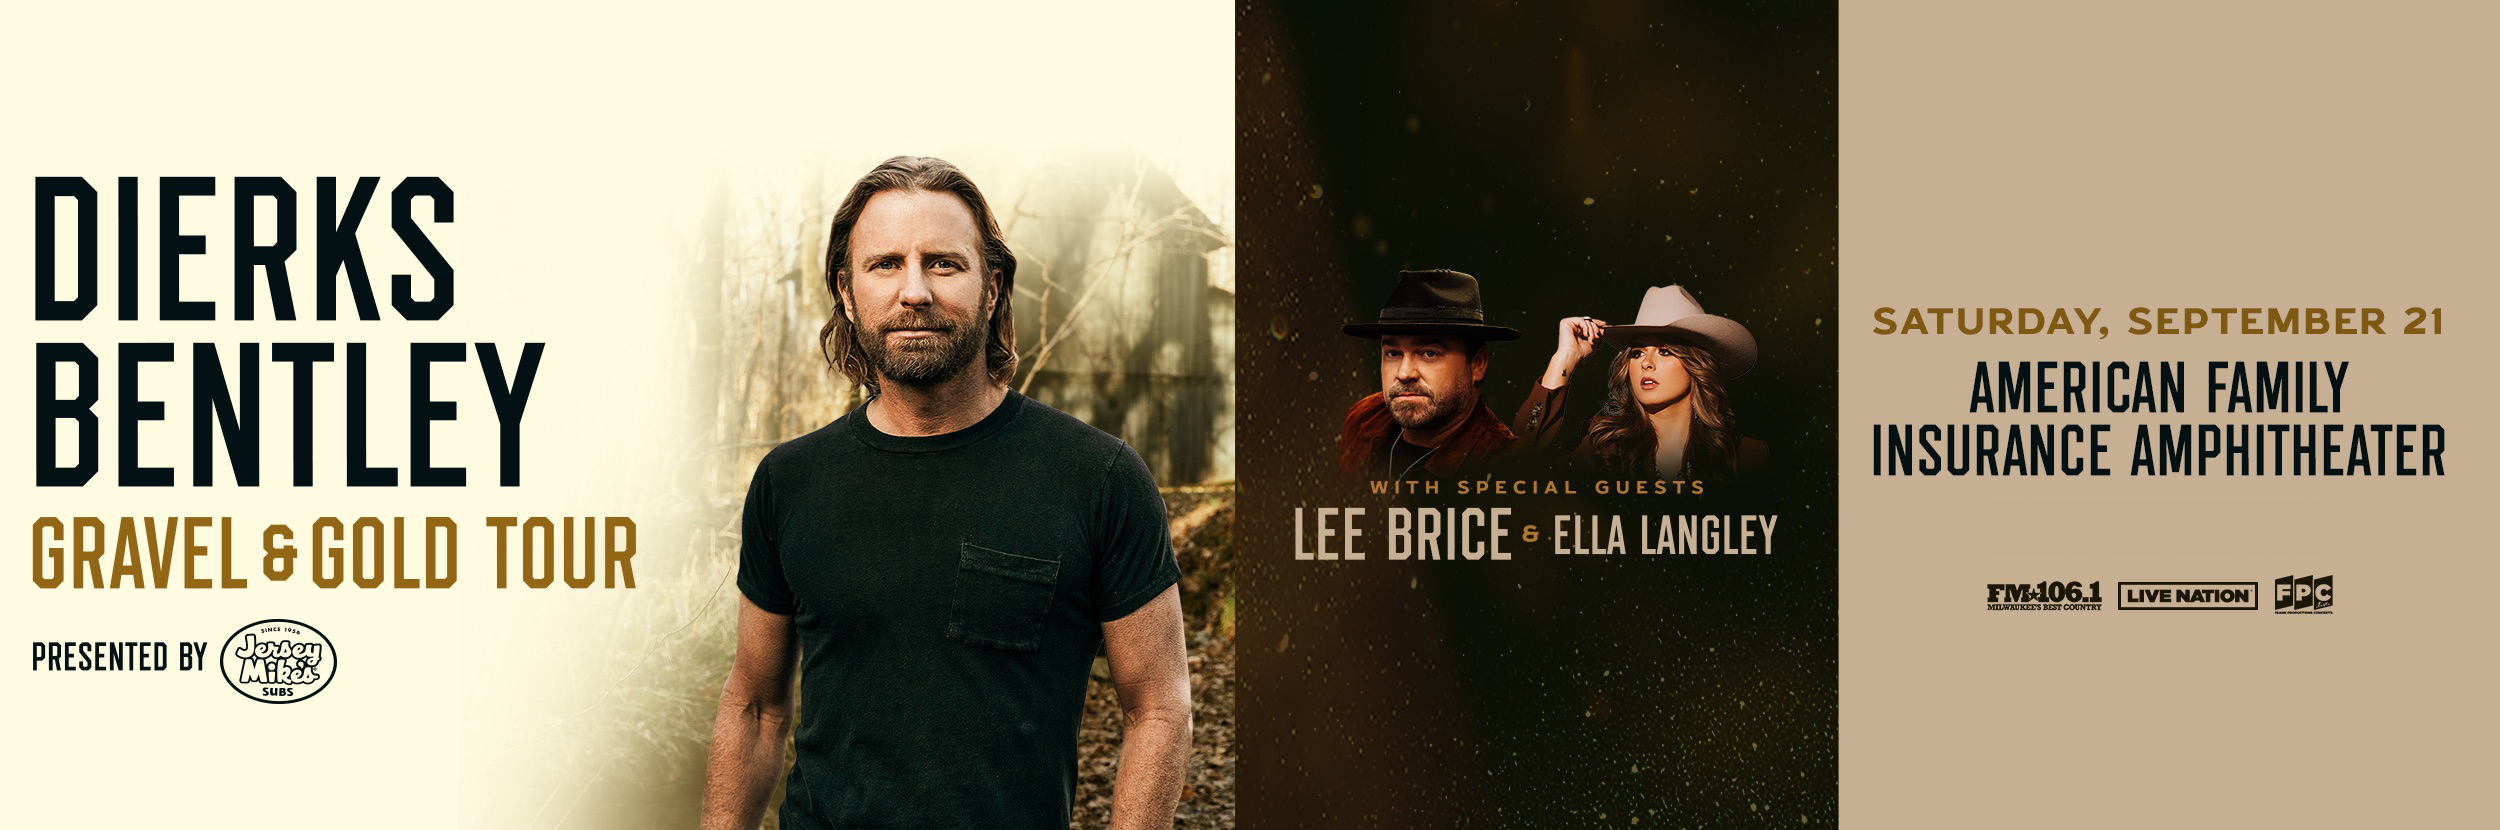 DIERKS BENTLEY WITH SPECIAL GUESTS LEE BRICE AND ELLA LANGLEY